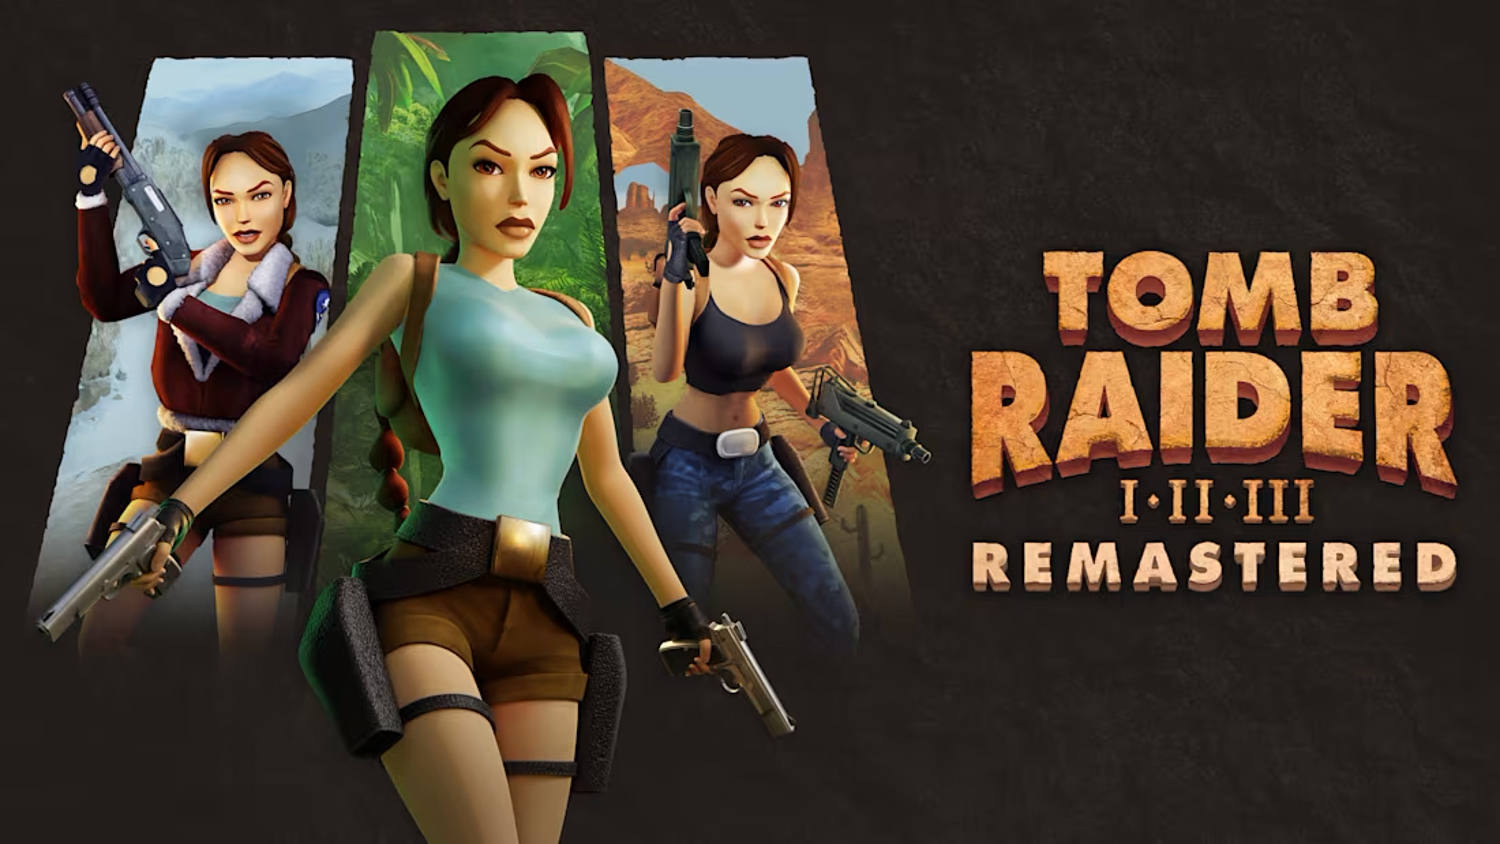 Lara Croft is the 'most iconic' video game character, new poll finds